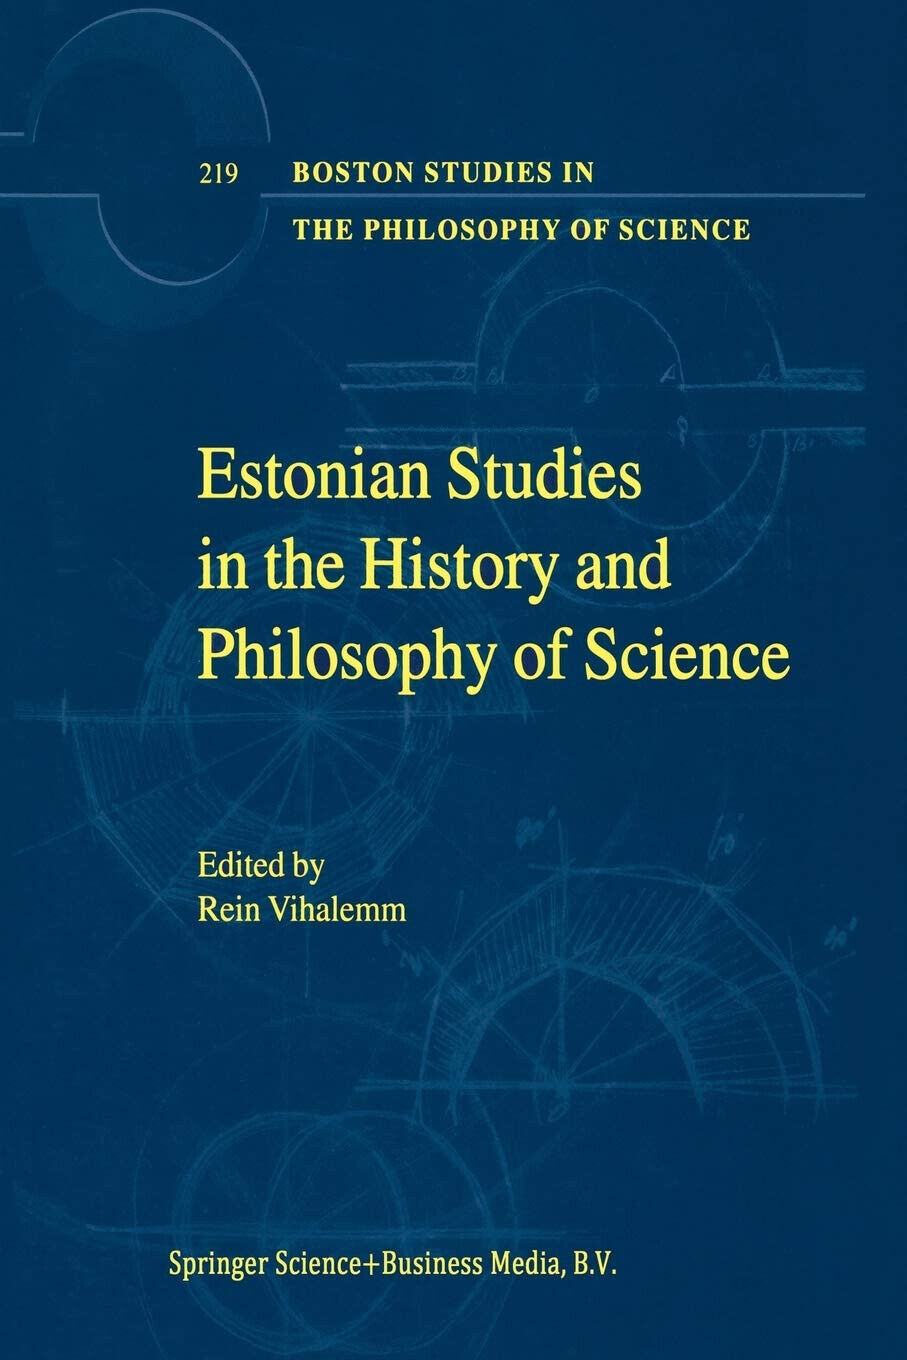 Estonian Studies in the History and Philosophy of Science - Rein Vihalemm - 2014